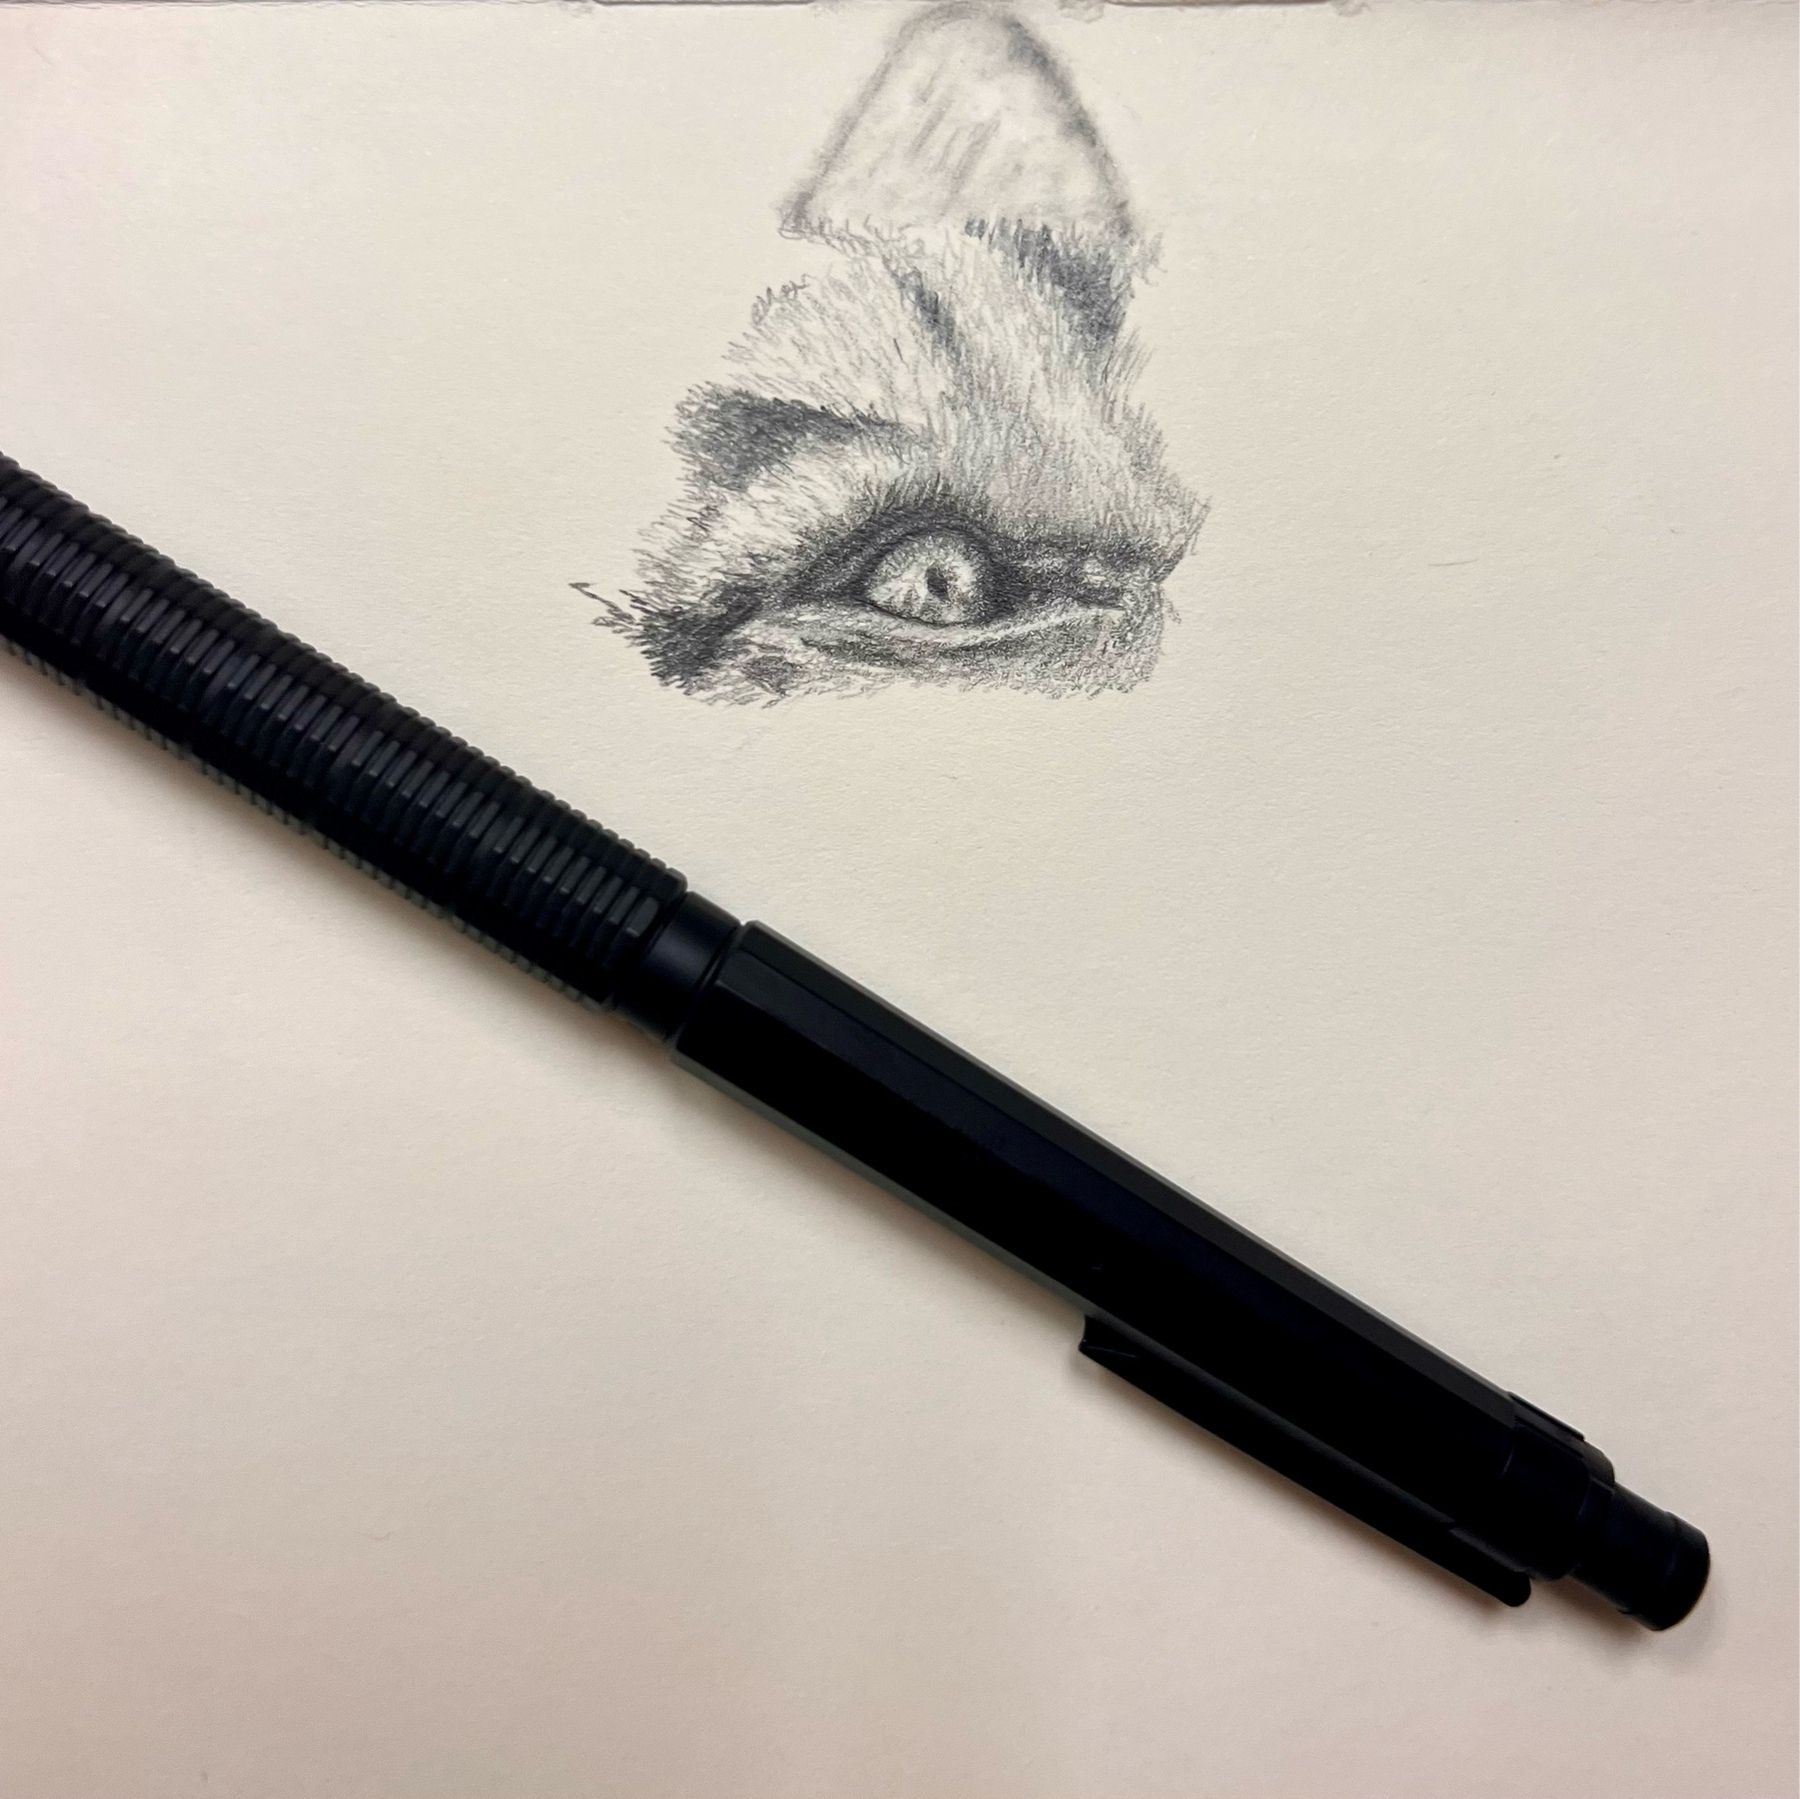 start of a tiger drawing including its ear and eye. pentel orenz nero pencil and a moleskine sketchbook